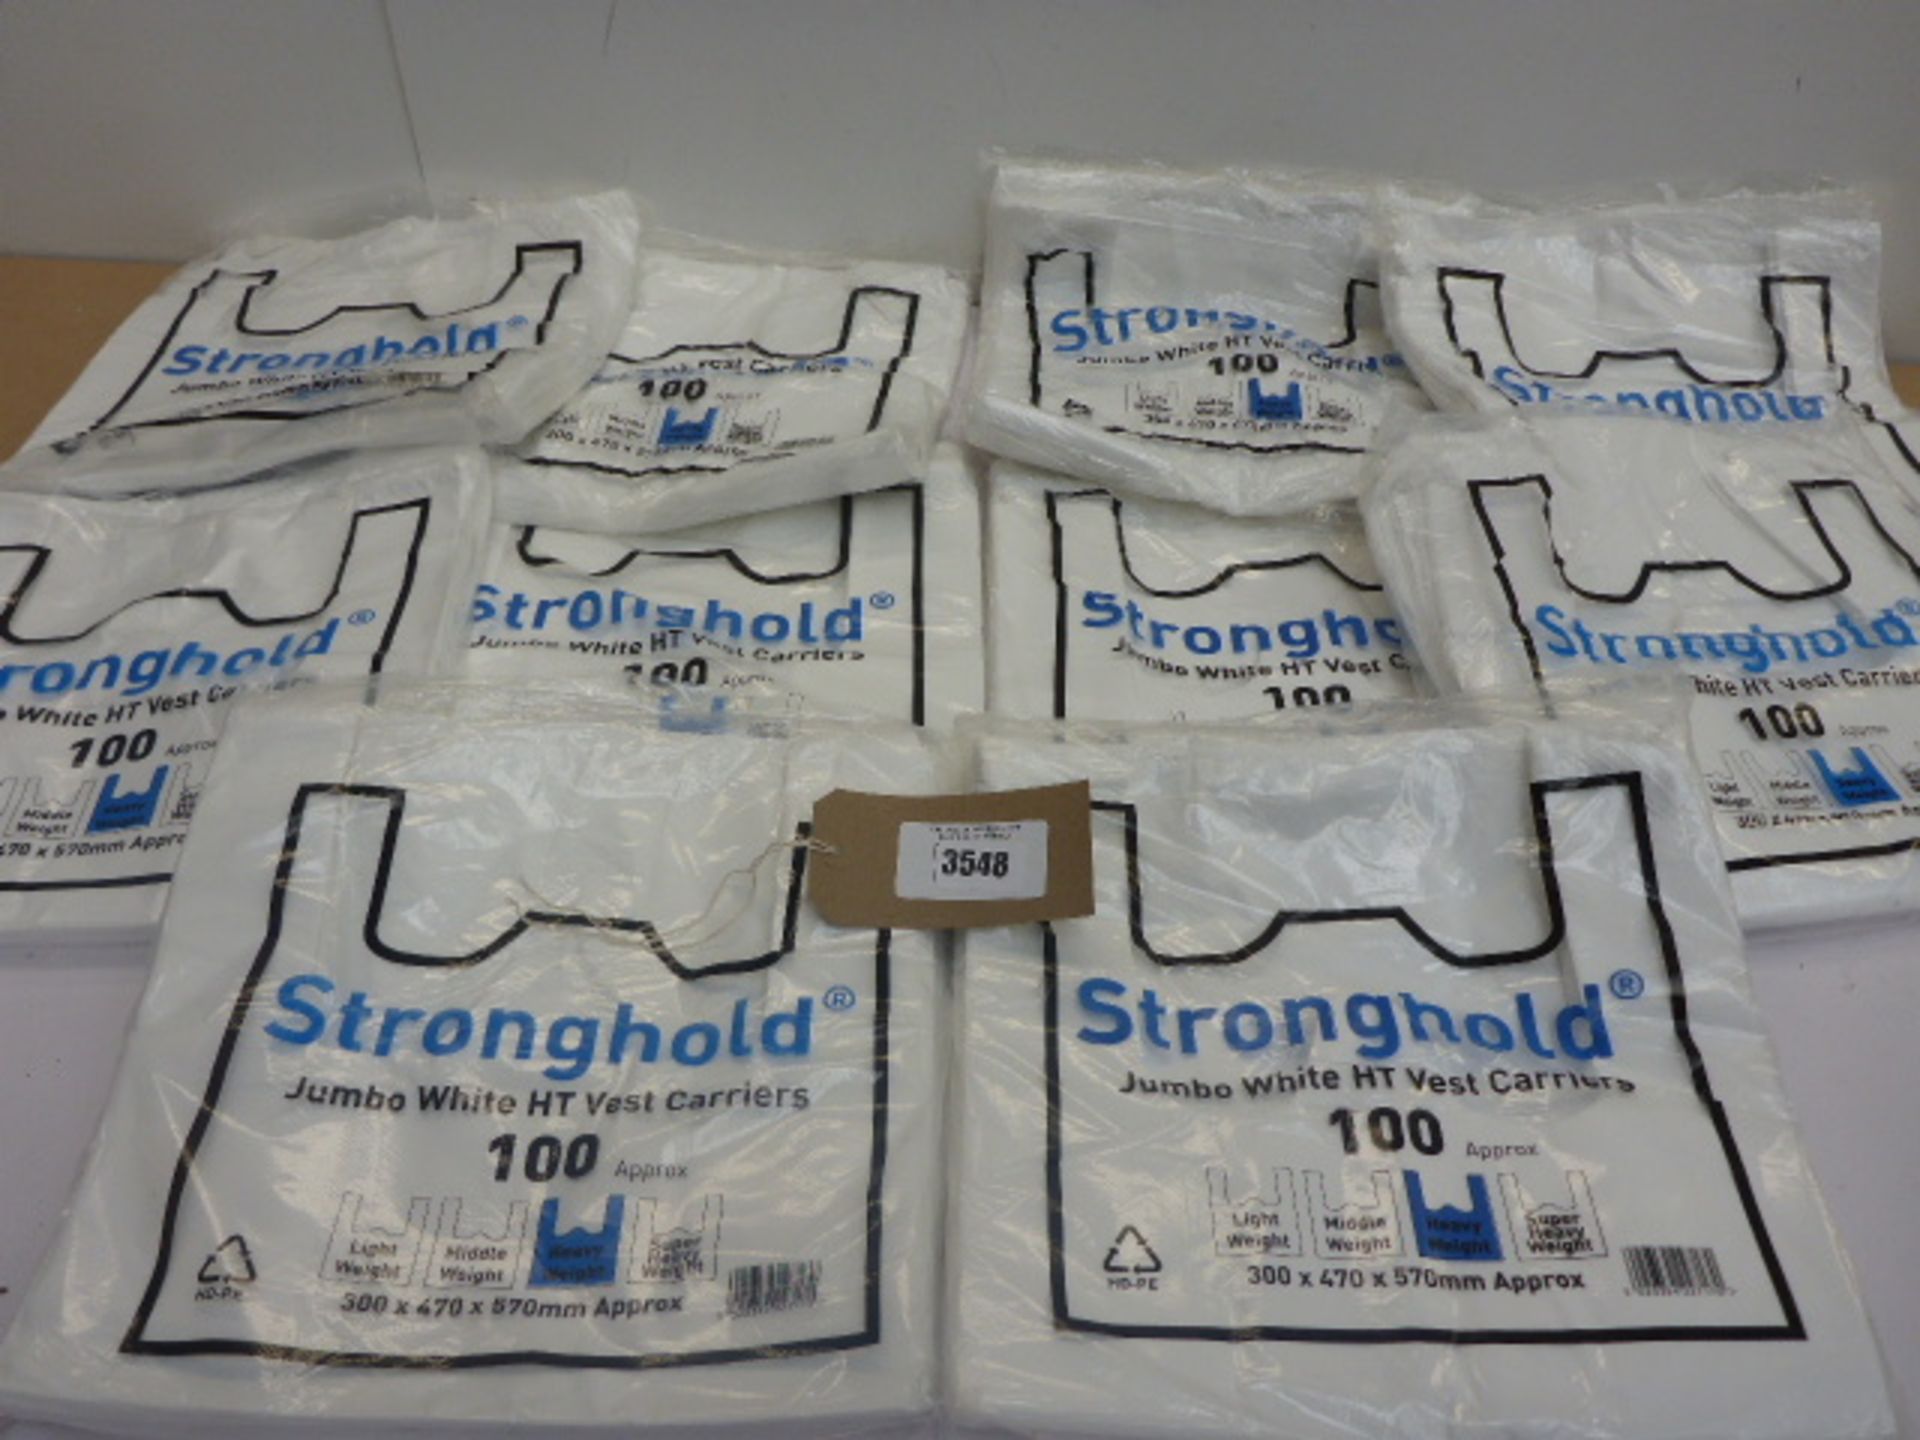 1000 Stronghold Jumbo white HT vest carriers